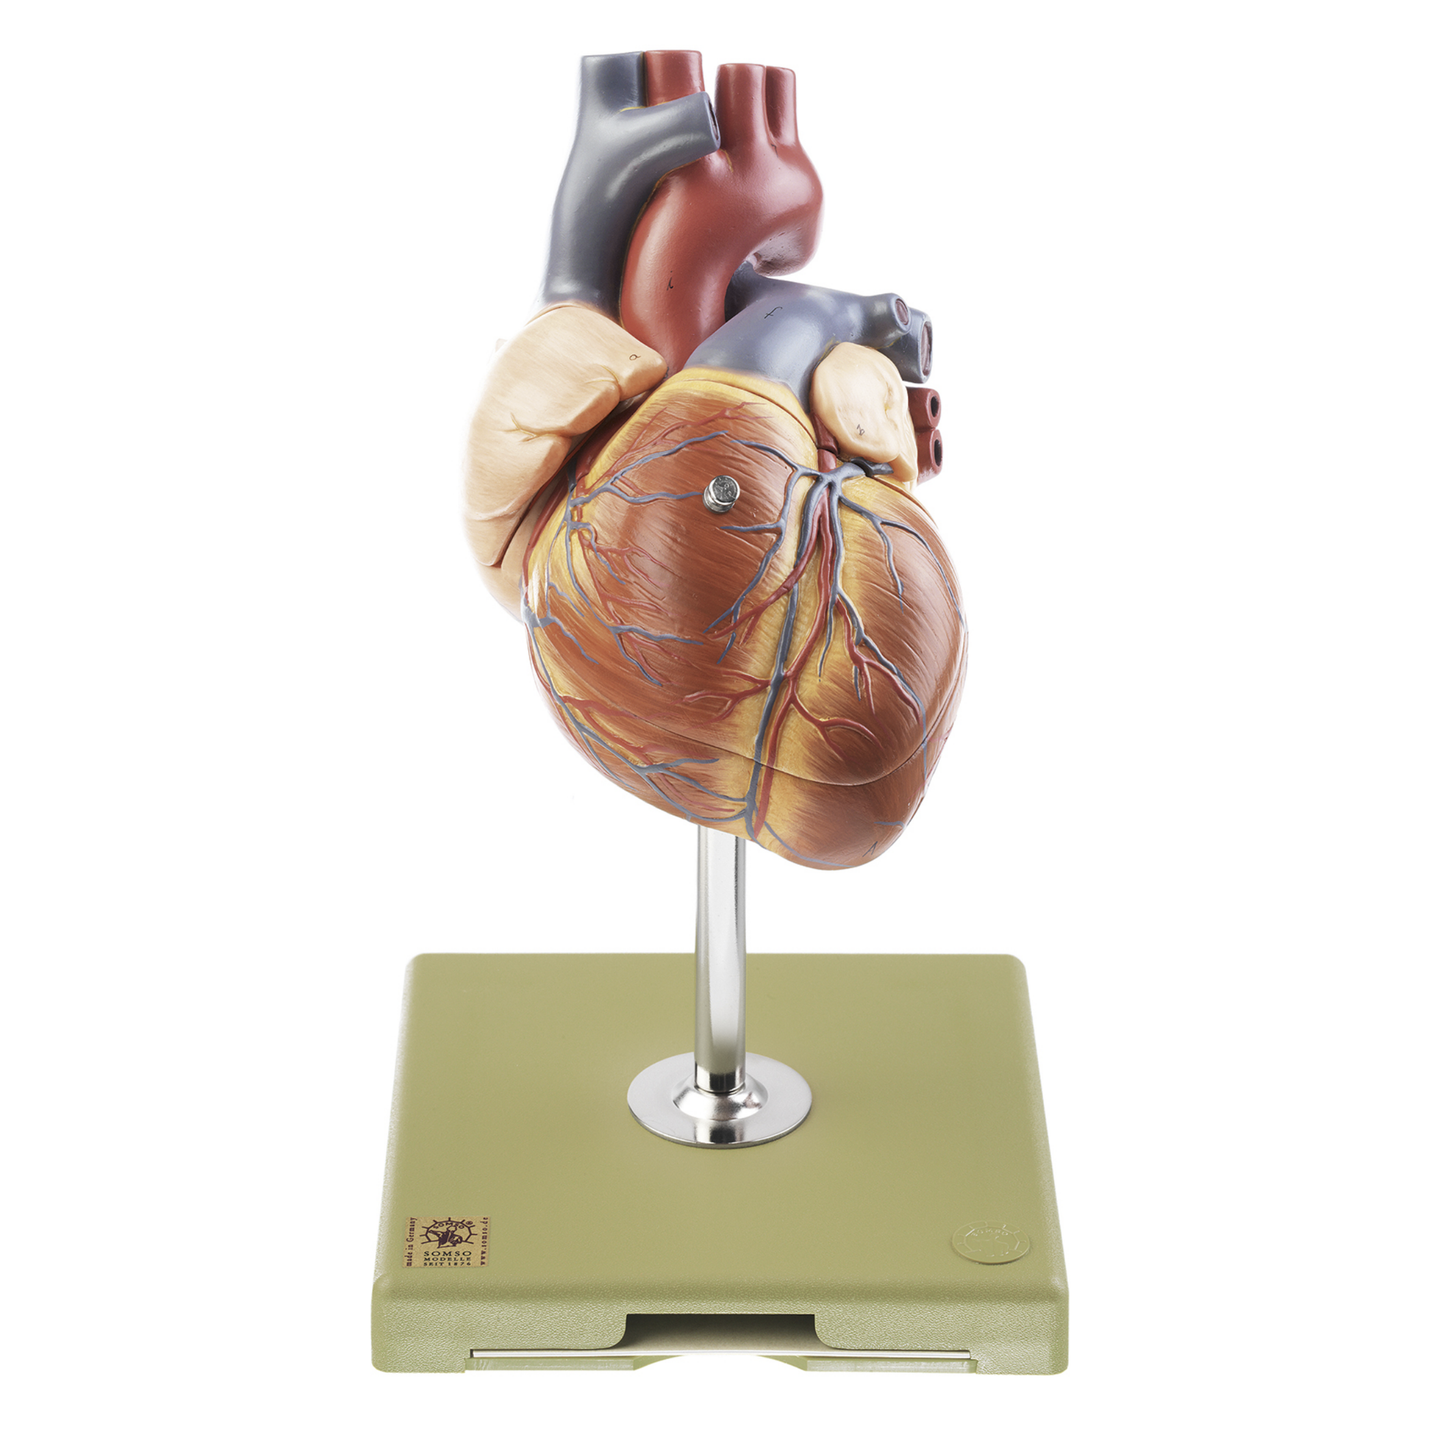 ENLARGED and highly detailed heart model with the impulse conduction system